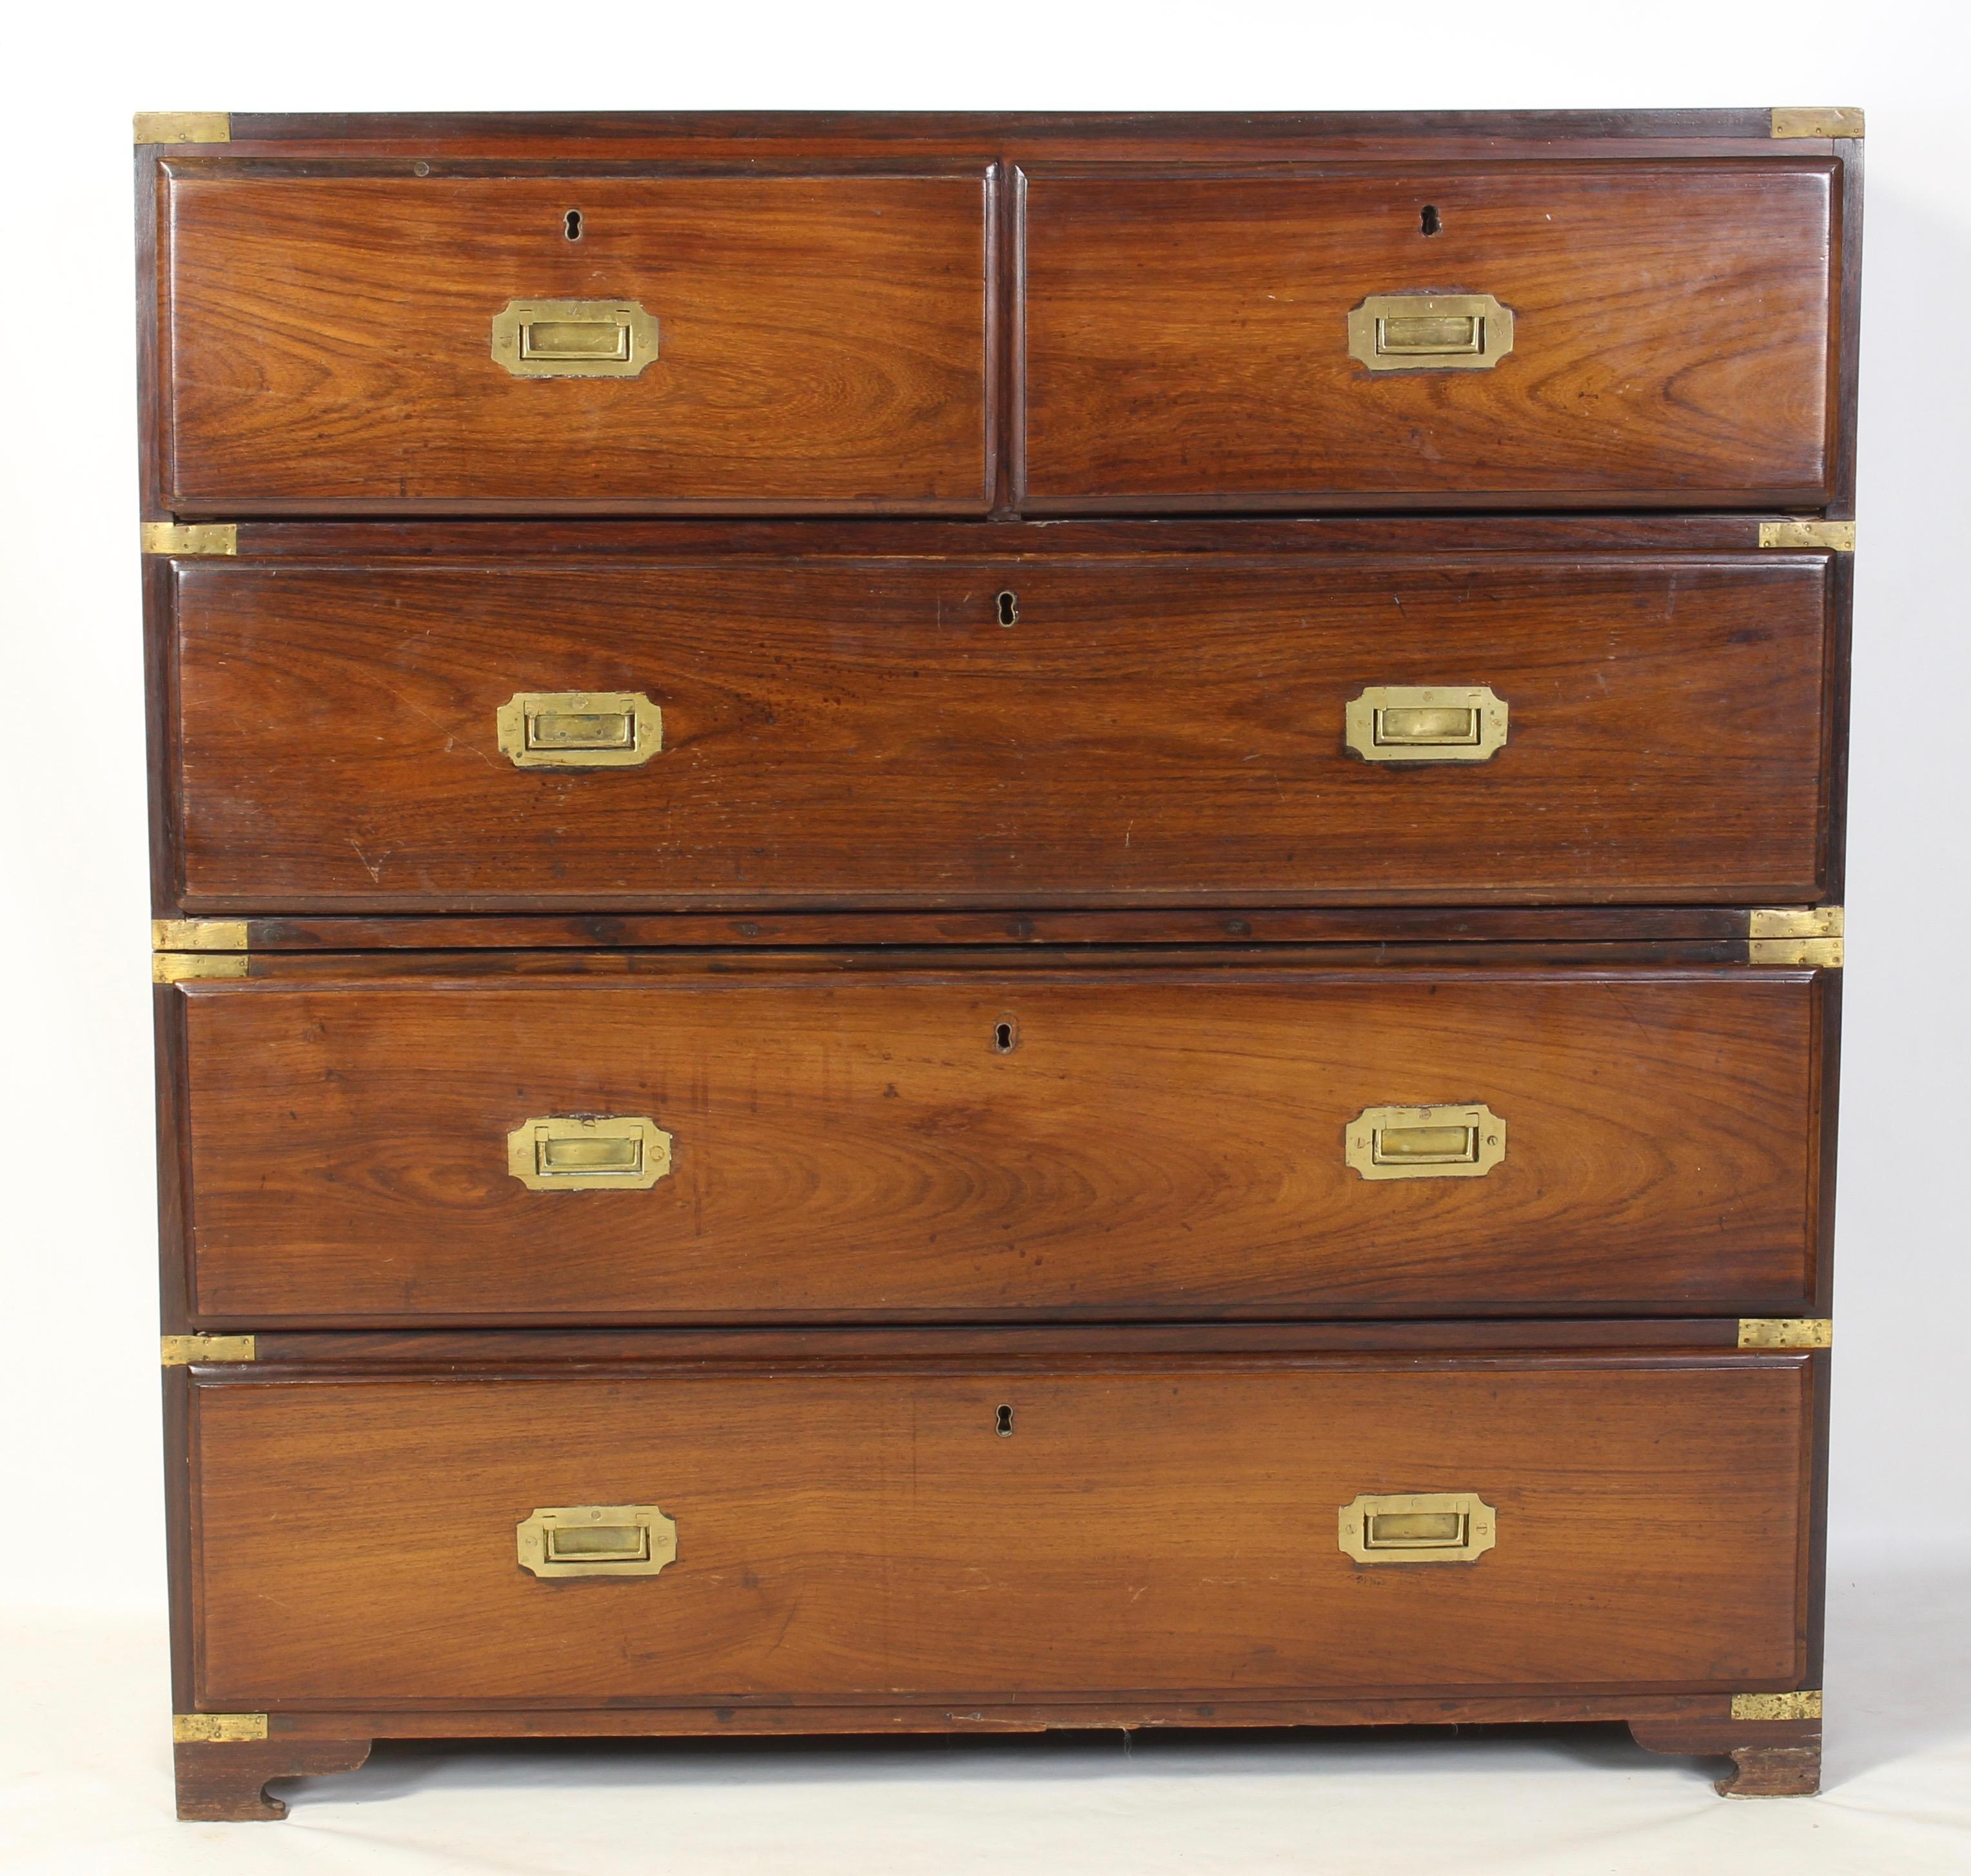 A handsome two-piece mid-19th century. English brass bound rosewood campaign chest of drawers with inset brass handles resting on low bracket feet.